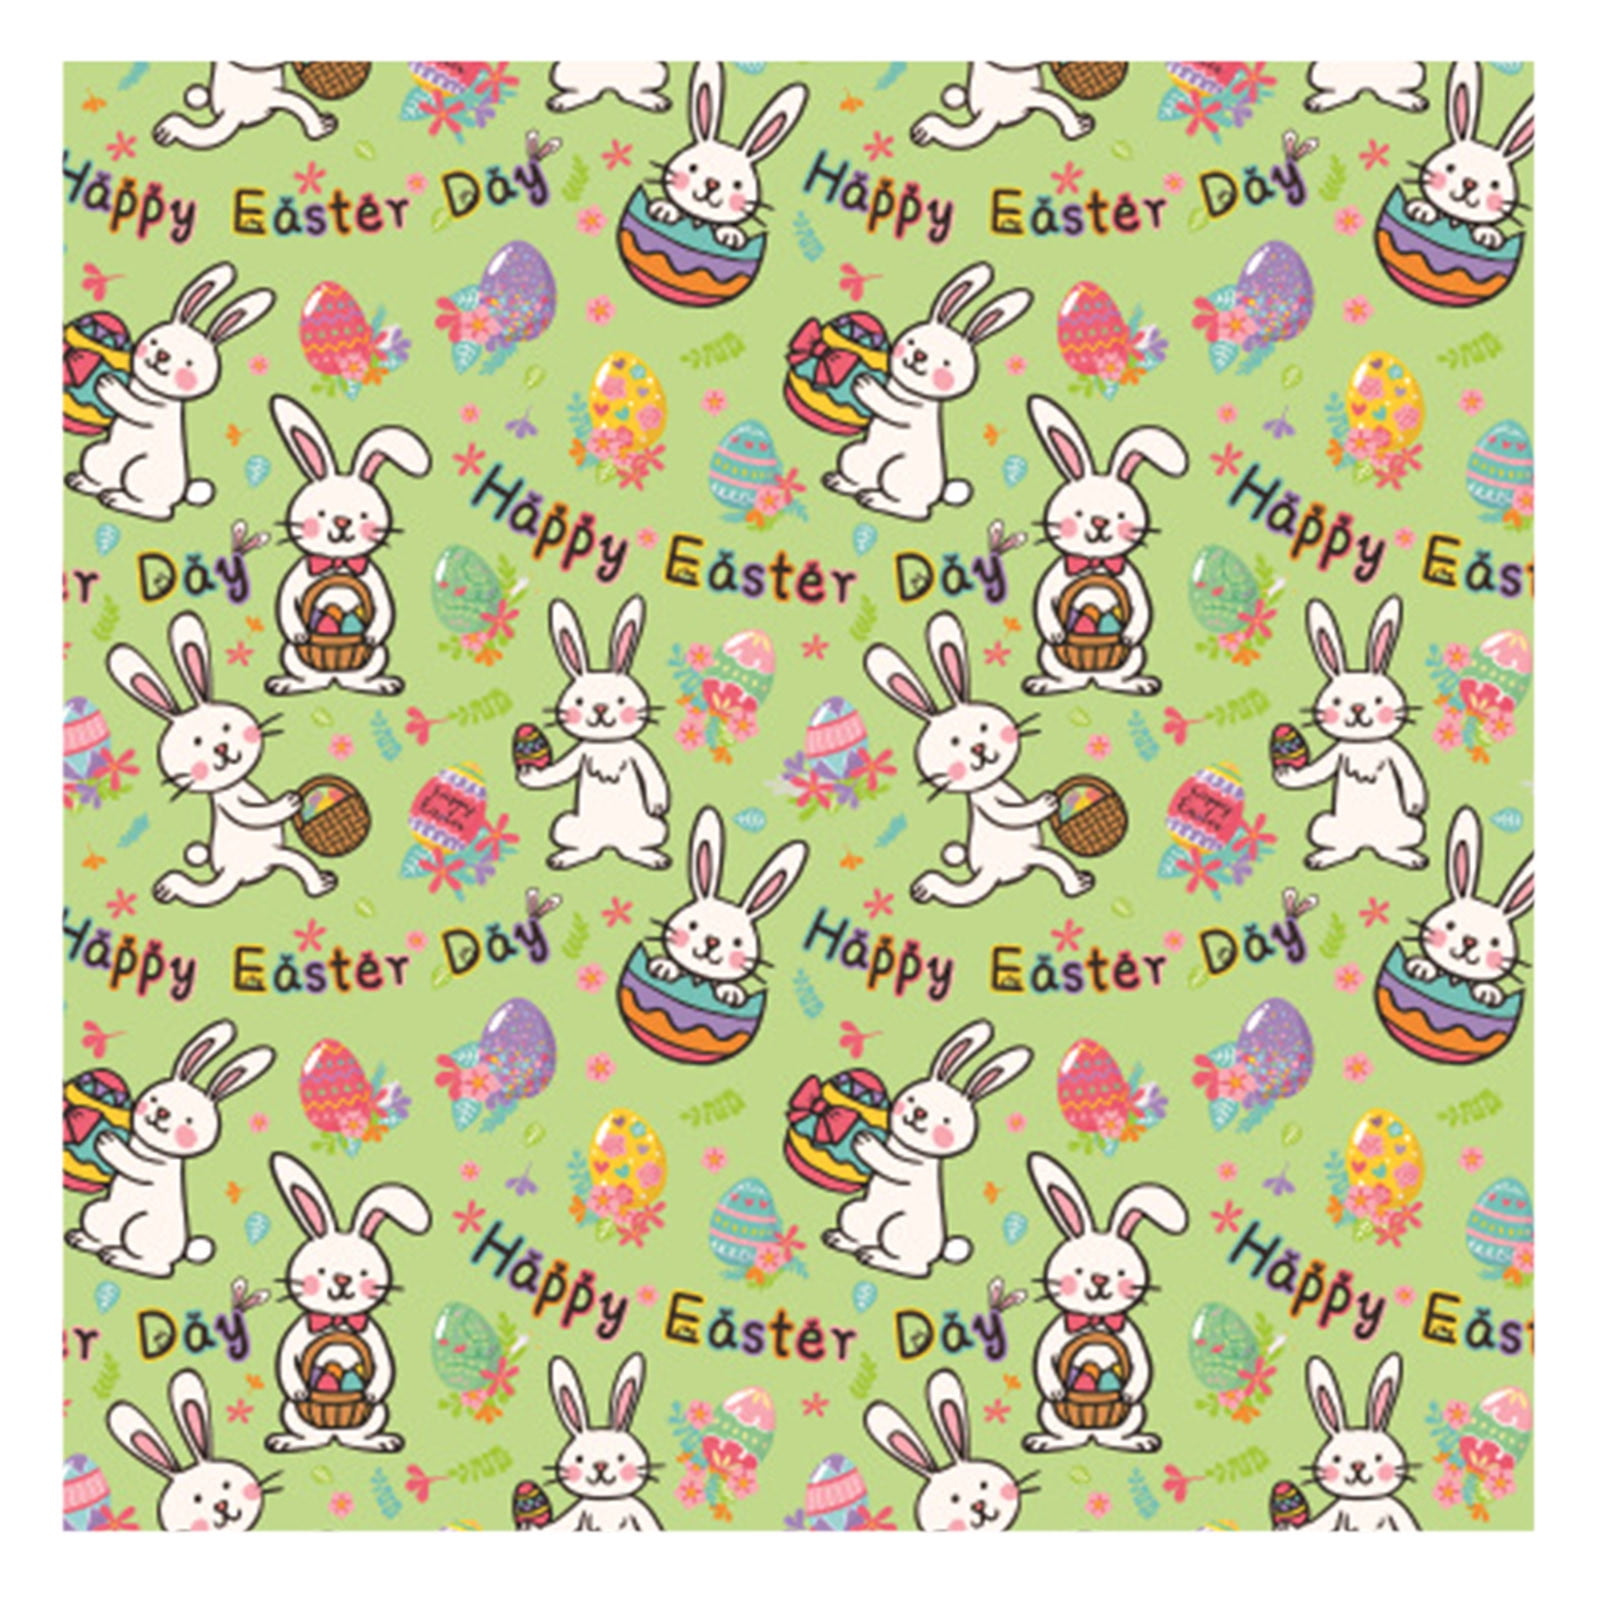 Boerni Easter Wrapping Paper,8 Sheets 4 Design Bunny Eggs Chicks Pattern Birthday Gift Wrap,20 x 28inch Cute Wrapping Paper Sheets with Ribbon for Easter